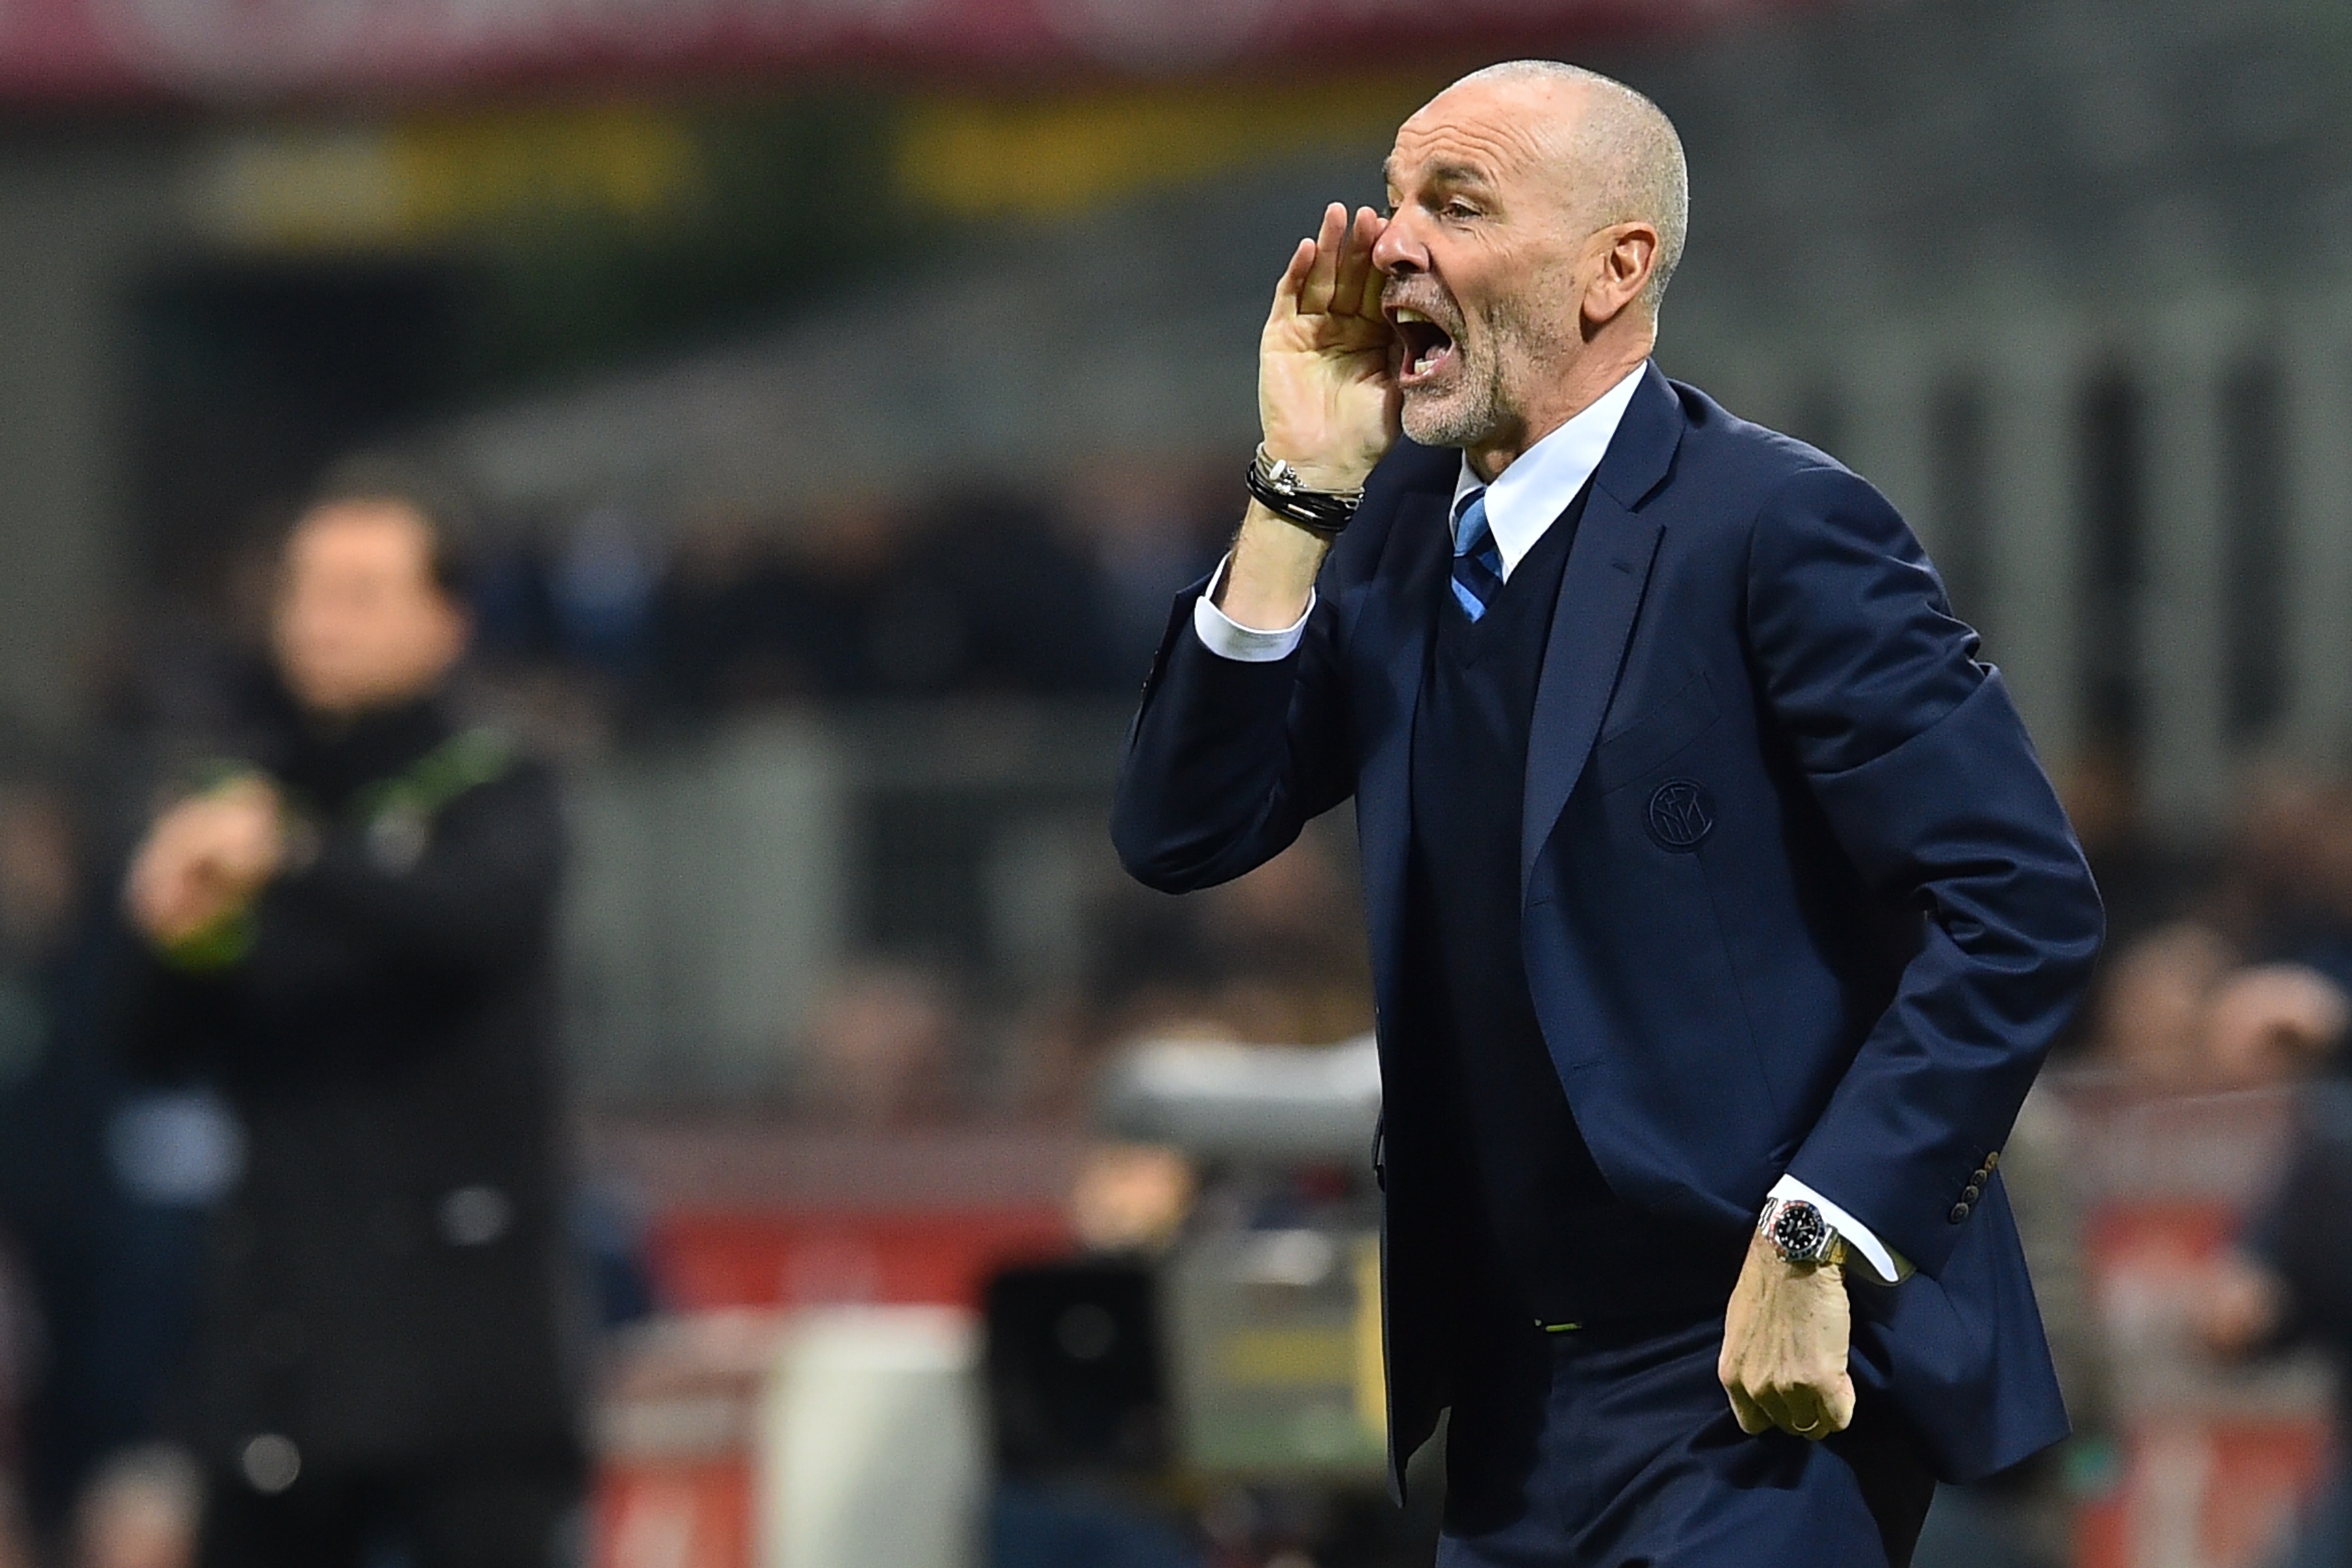 Pistone: “Pioli has done really well. Icardi is one of the best in the world.”